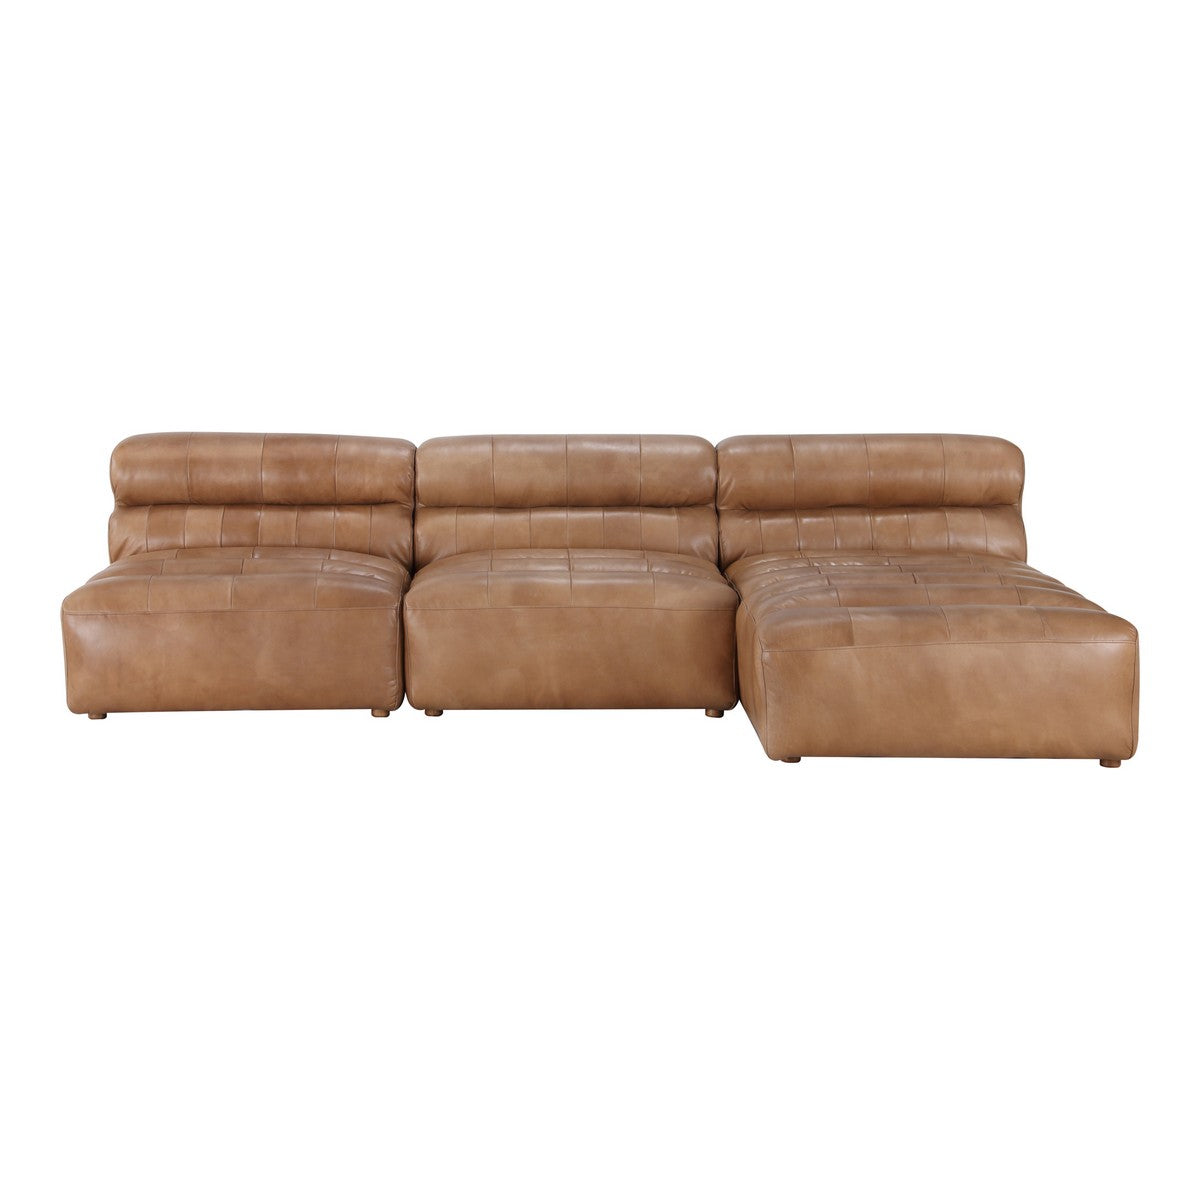 Moe's Home Collection Ramsay Signature Modular Sectional Tan - QN-1018-40 - Moe's Home Collection - Extras - Minimal And Modern - 1